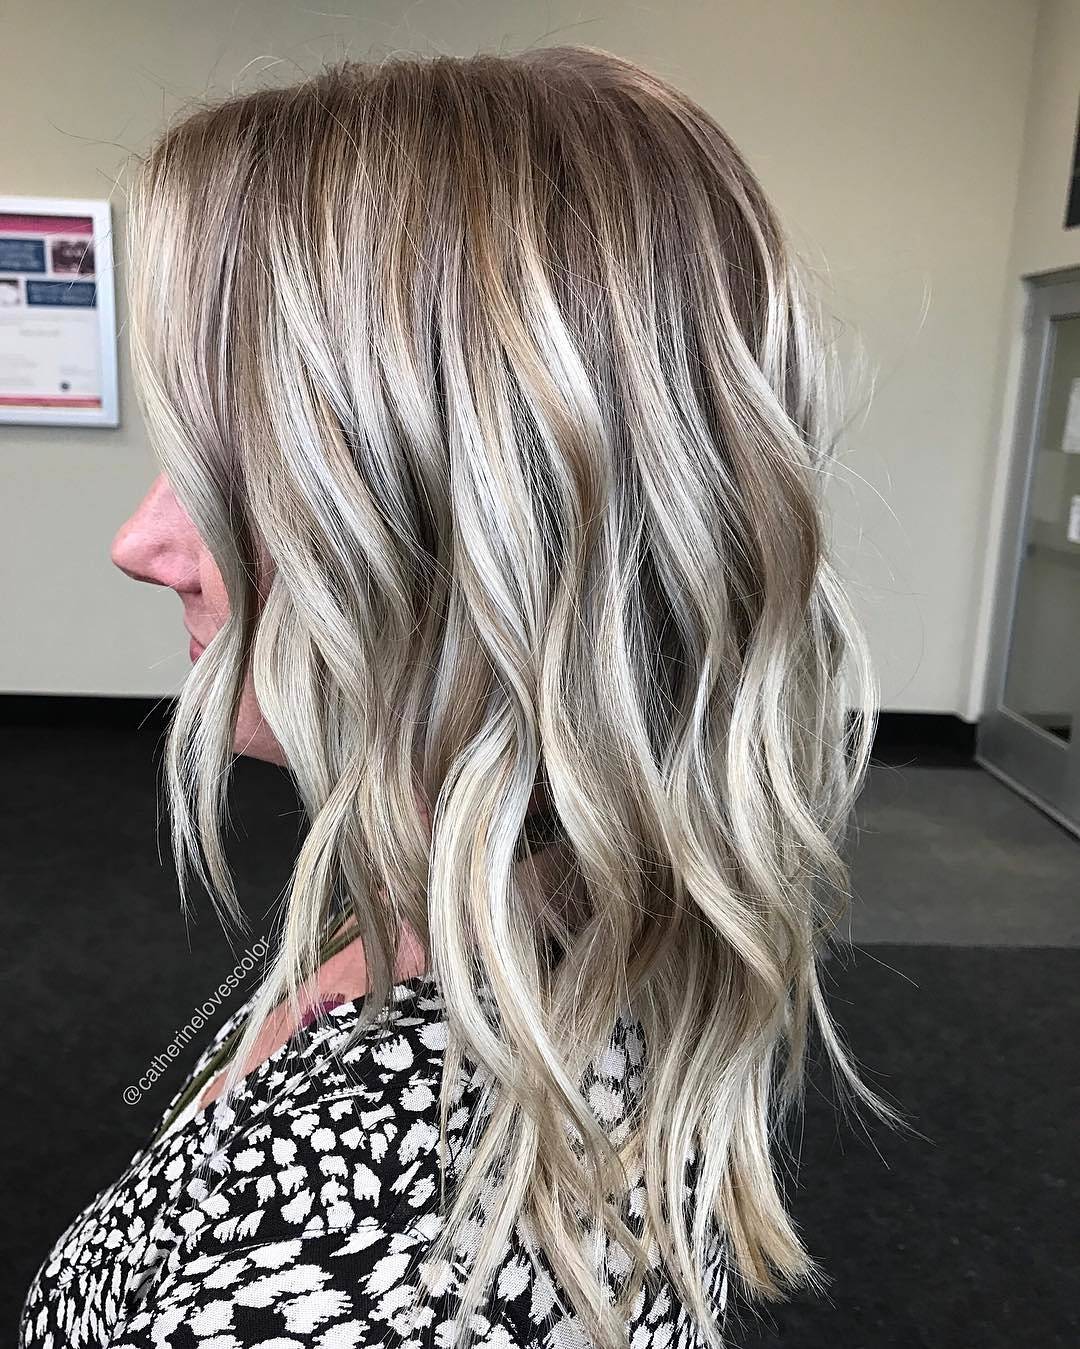 20 Beautiful Blonde Balayage Hair Color Ideas - Trendy Hair Color 2020